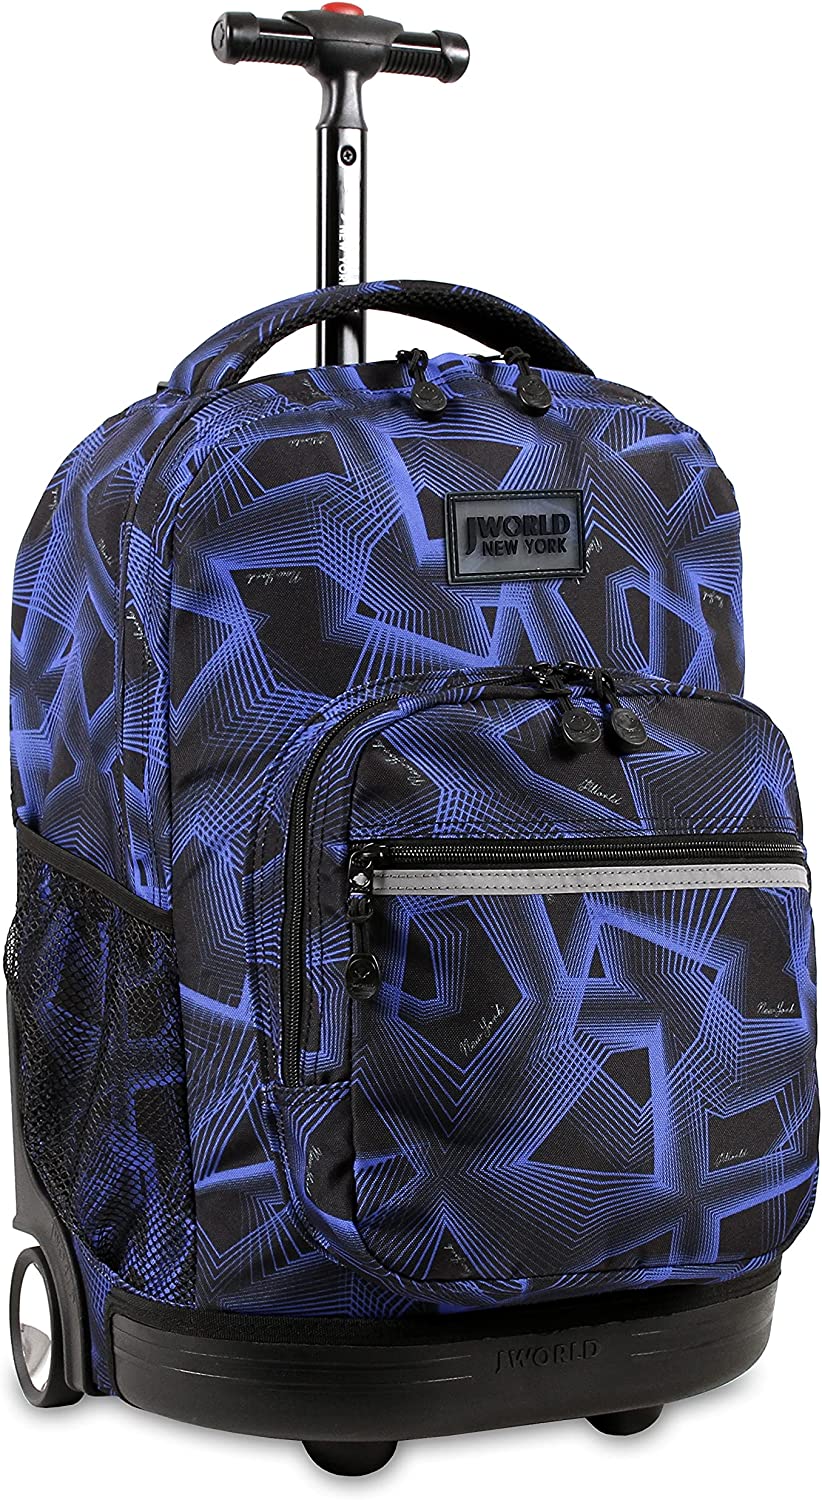 Review of Sunrise Rolling Backpack. Roller Bag with Wheels, Disco, 18